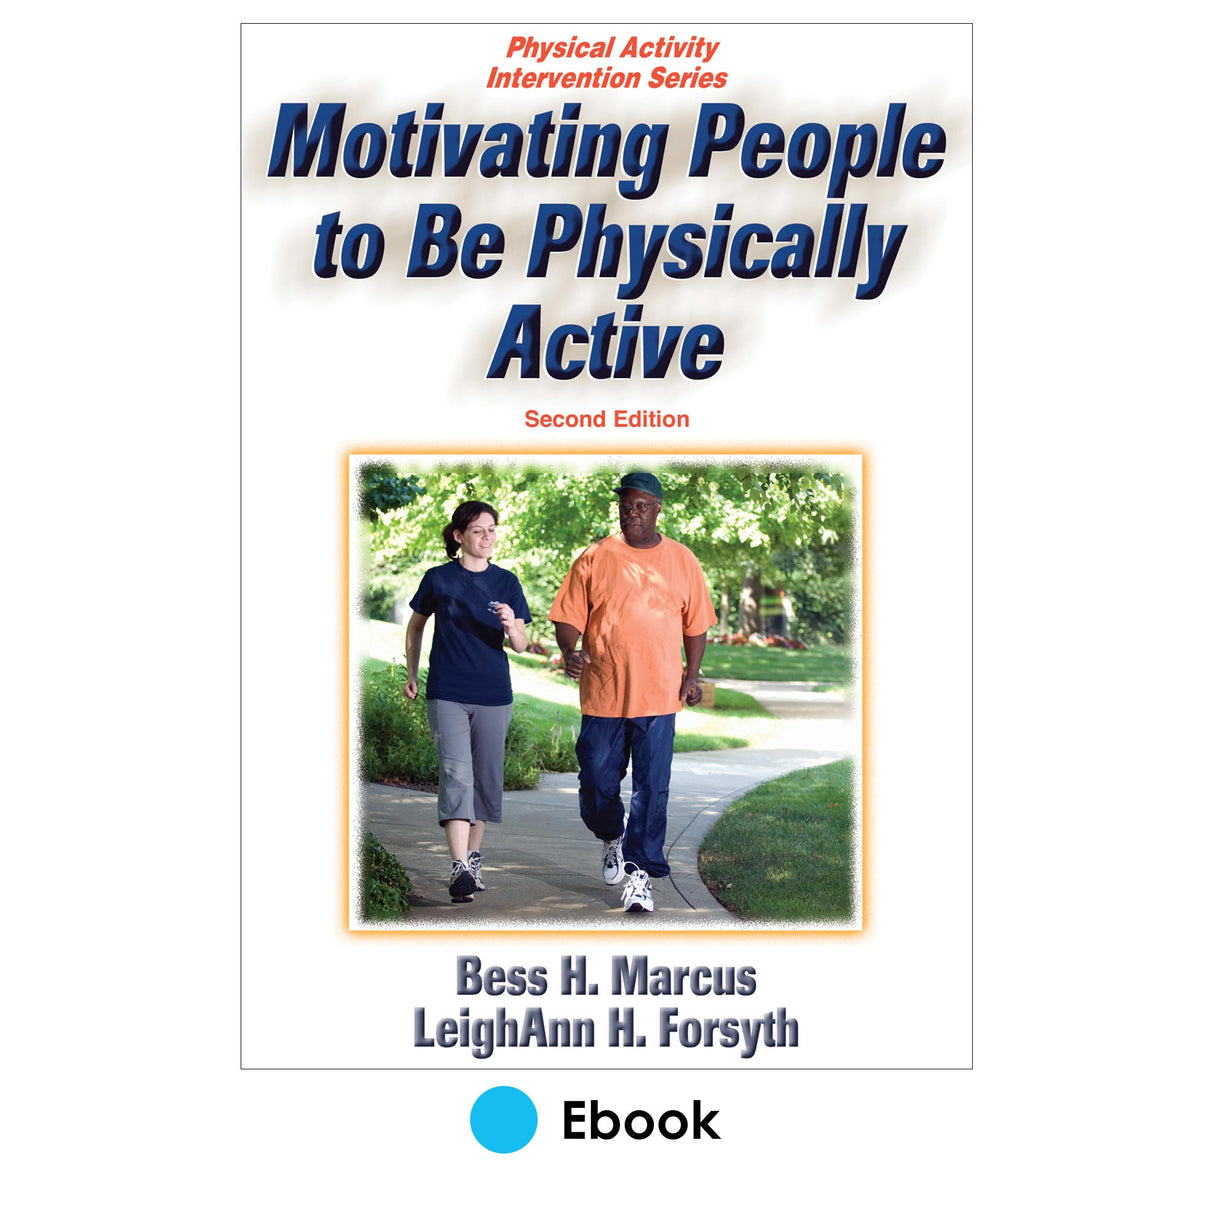 Motivating People to Be Physically Active 2nd Edition PDF